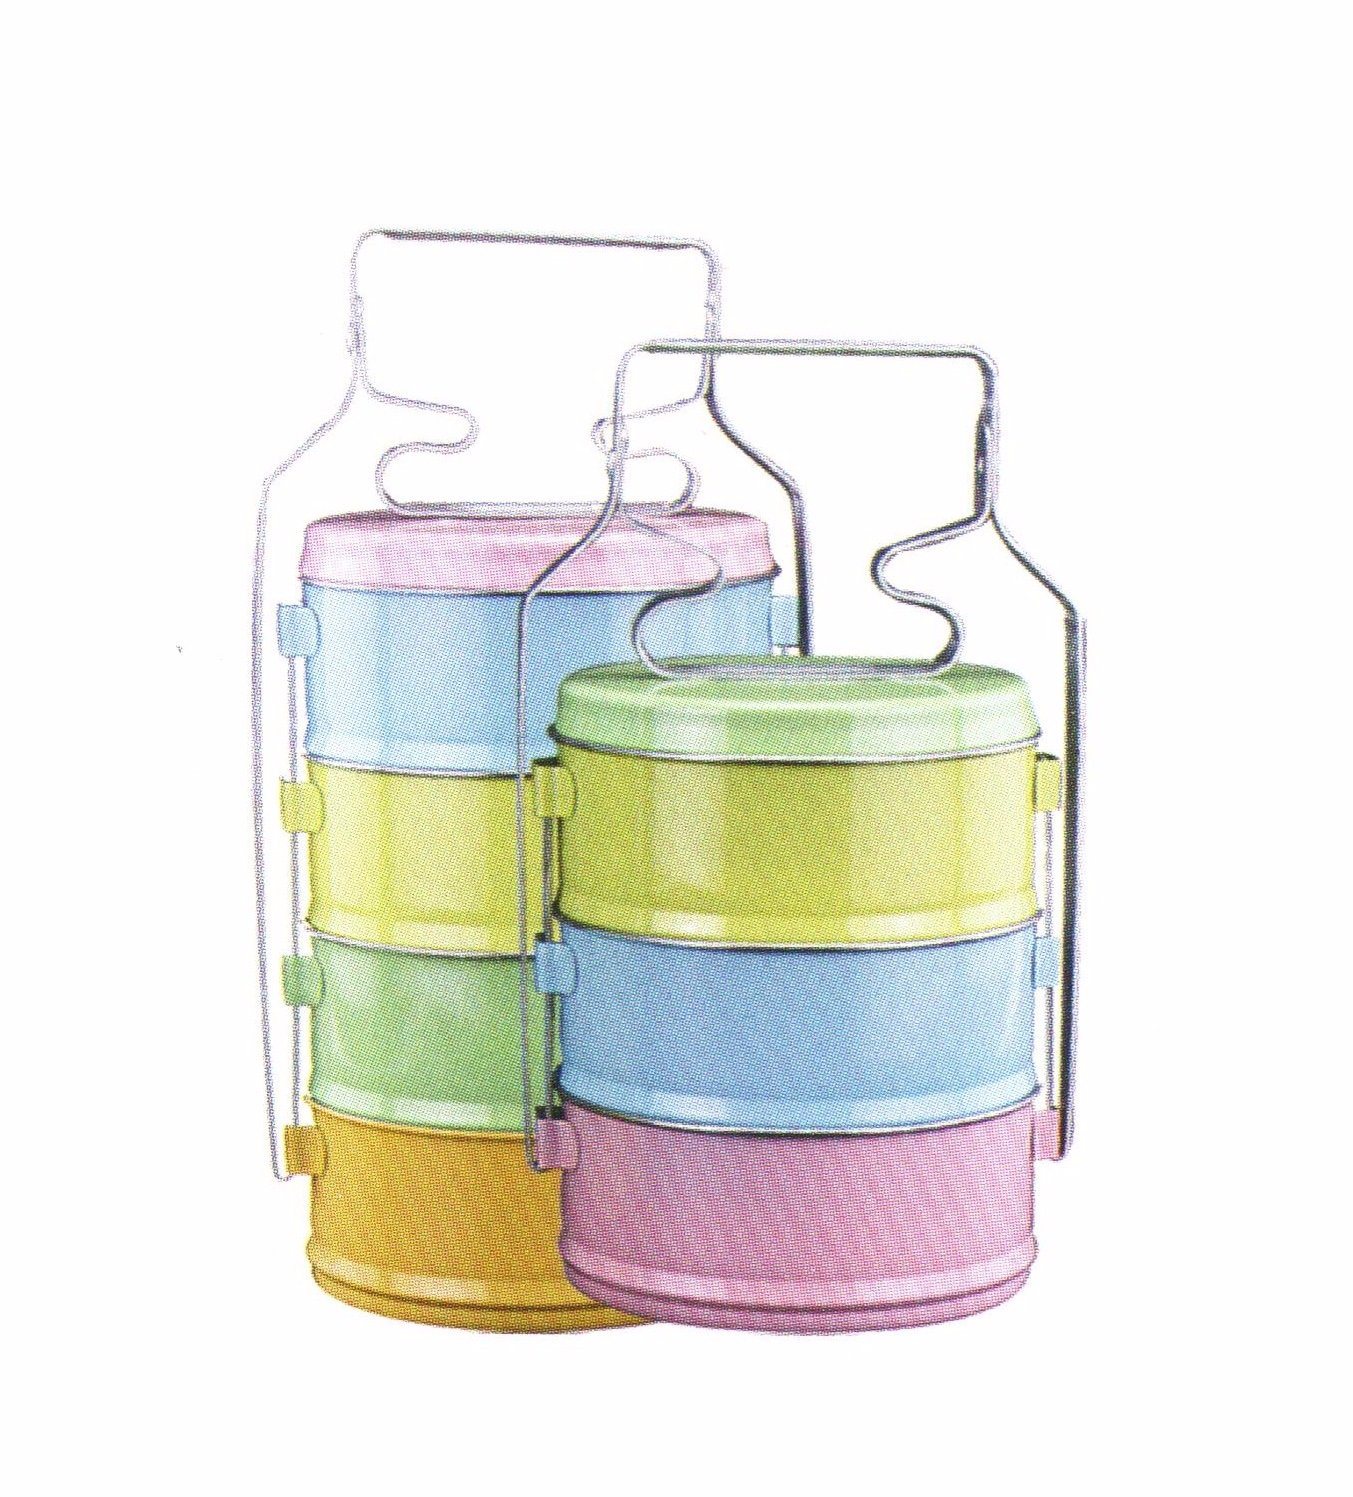 New Fashion Design for Kitchen Utensil Set -
 3-4 Layers Stainless Steel Lunch Box Food Carrier Lb004 – Long Prosper